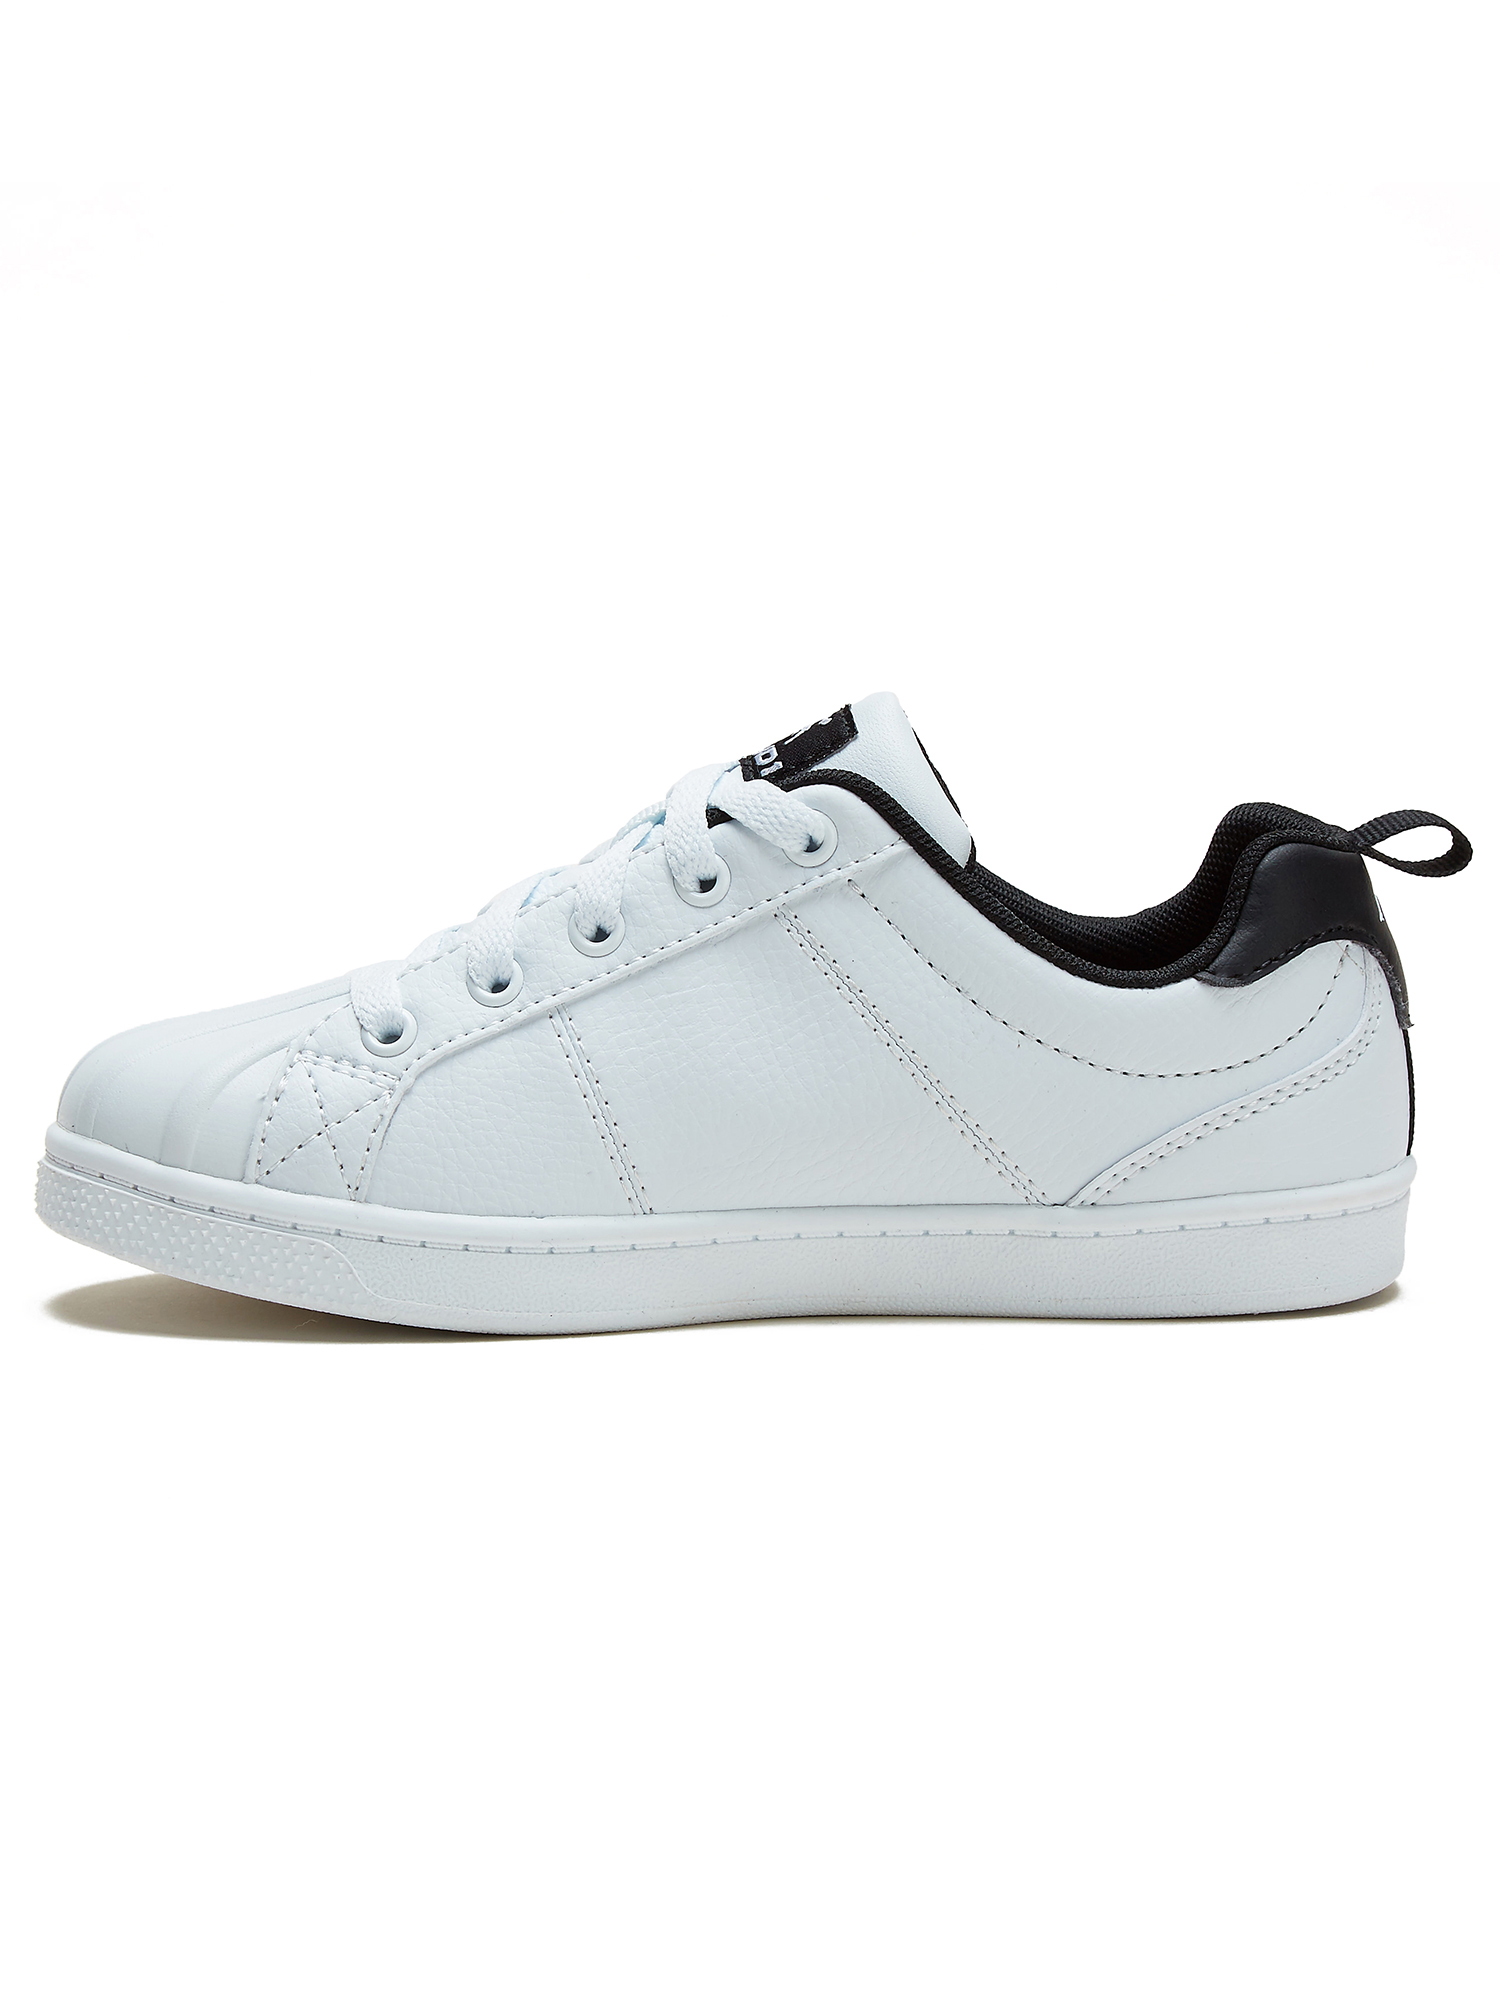 Boys' Meister Casual Court Shoe - image 2 of 5